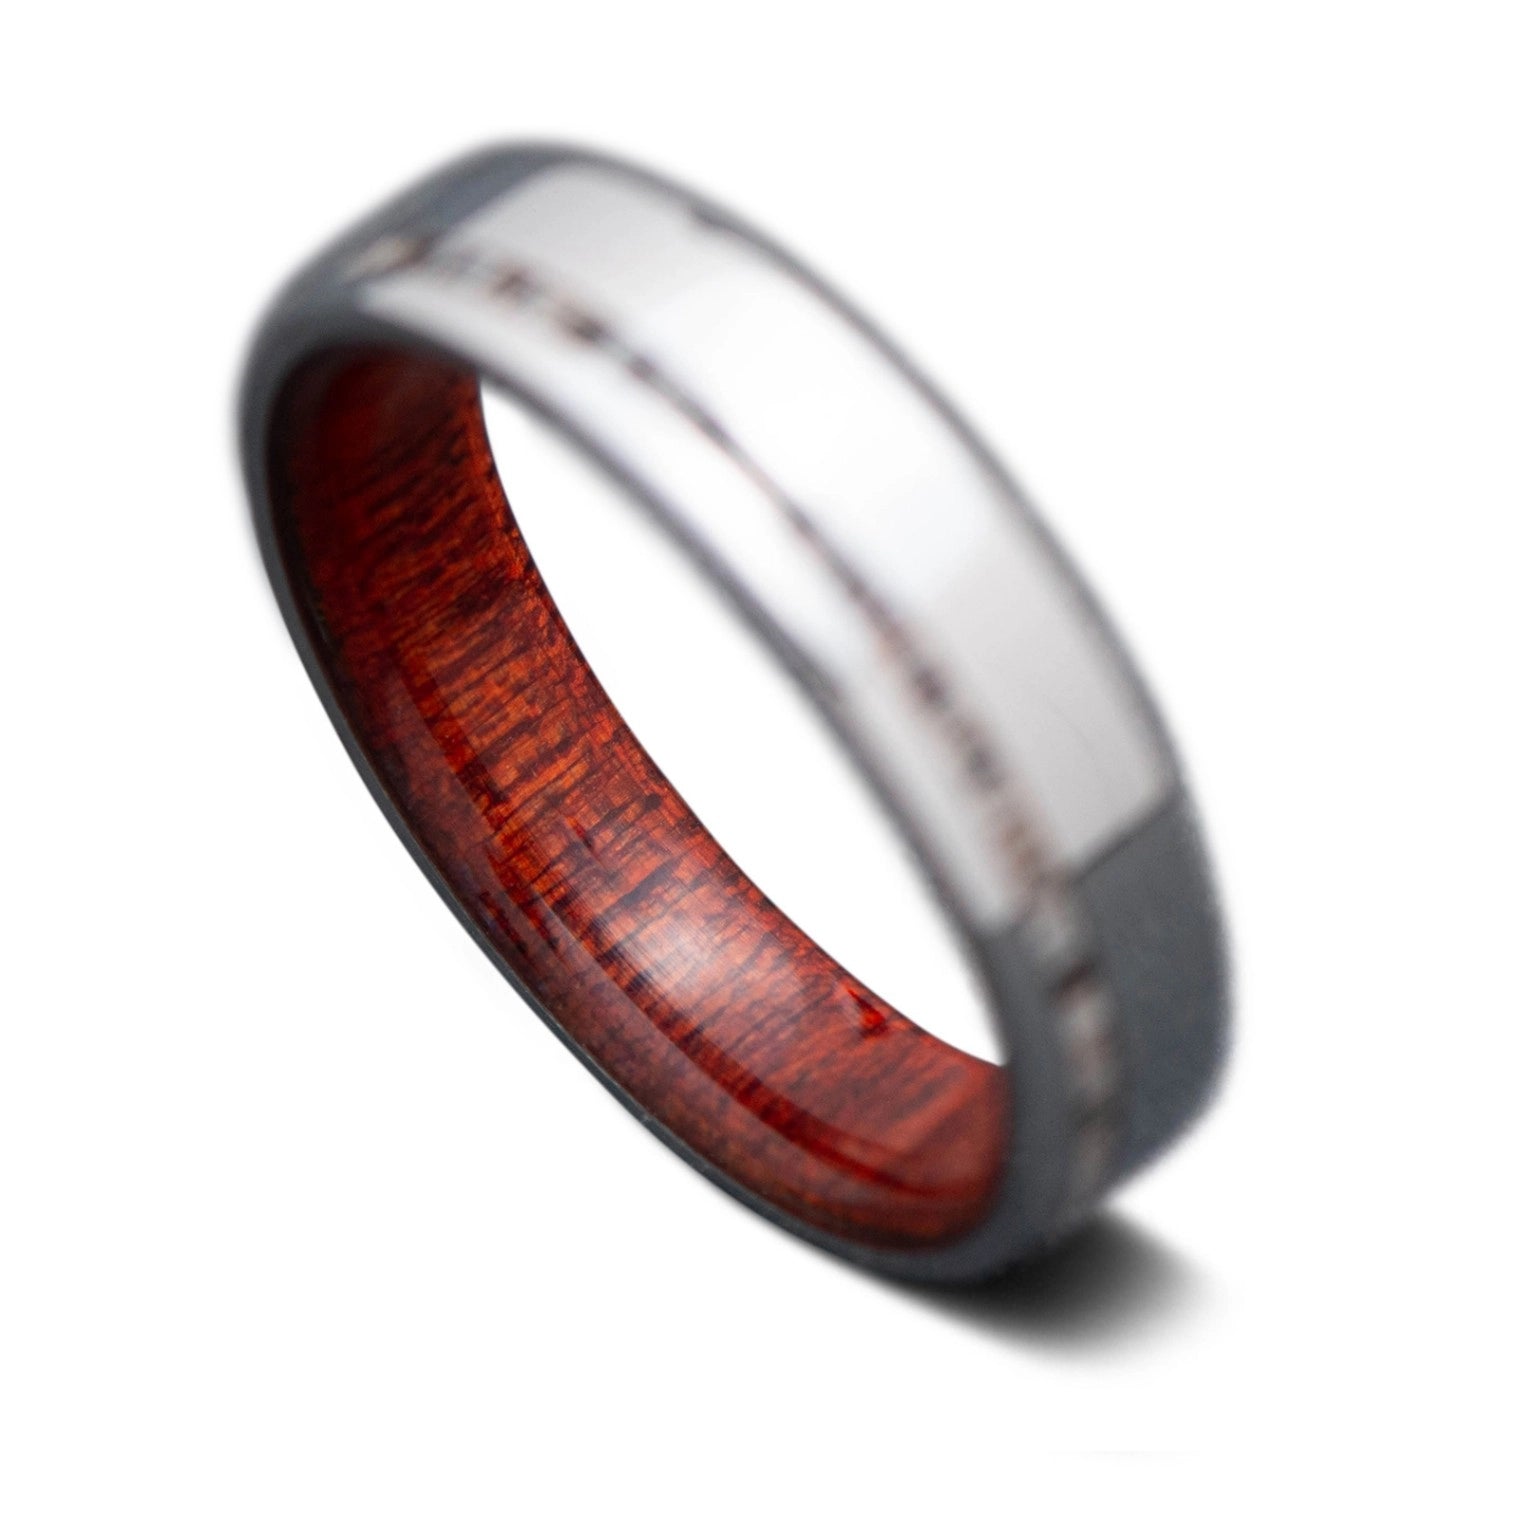 Back of Titanium Core Ring with Deer Antler inlay and Bloodwood inner sleeve, 5mm -THE SHIFT